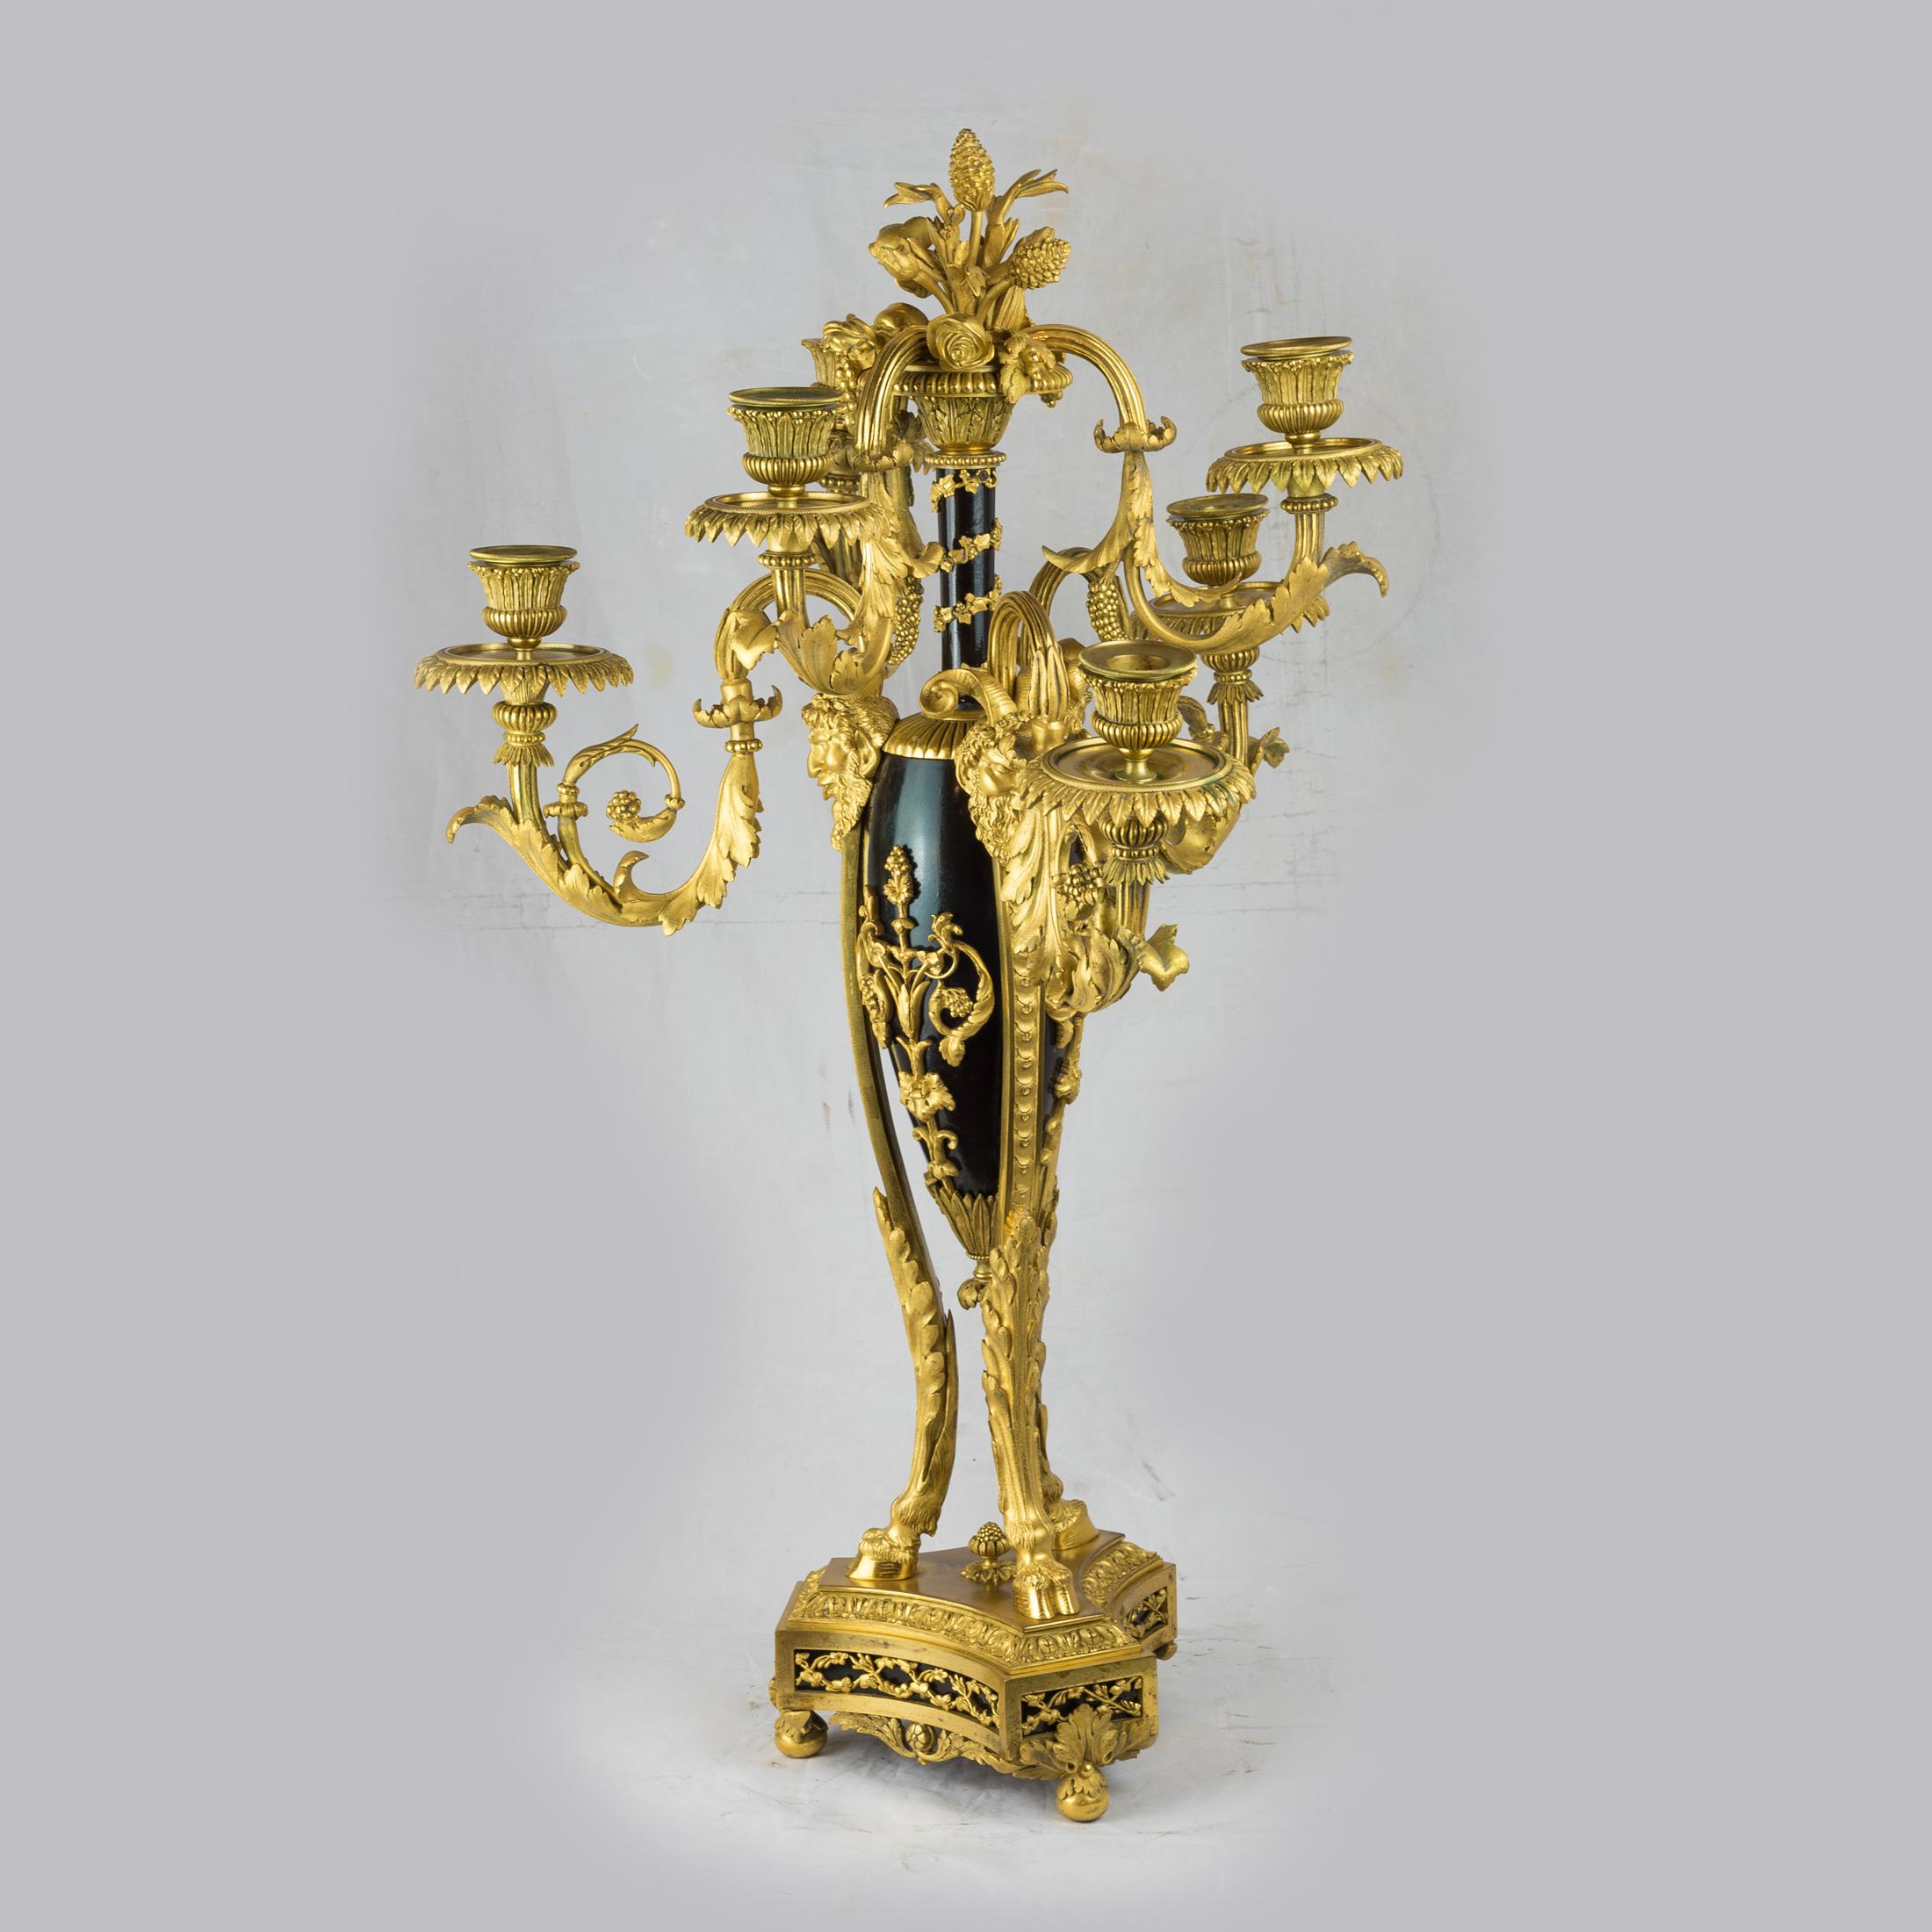 French Pair of Napoleon III Gilt-Bronze Six-Light Candelabras Attributed to Beurdeley For Sale